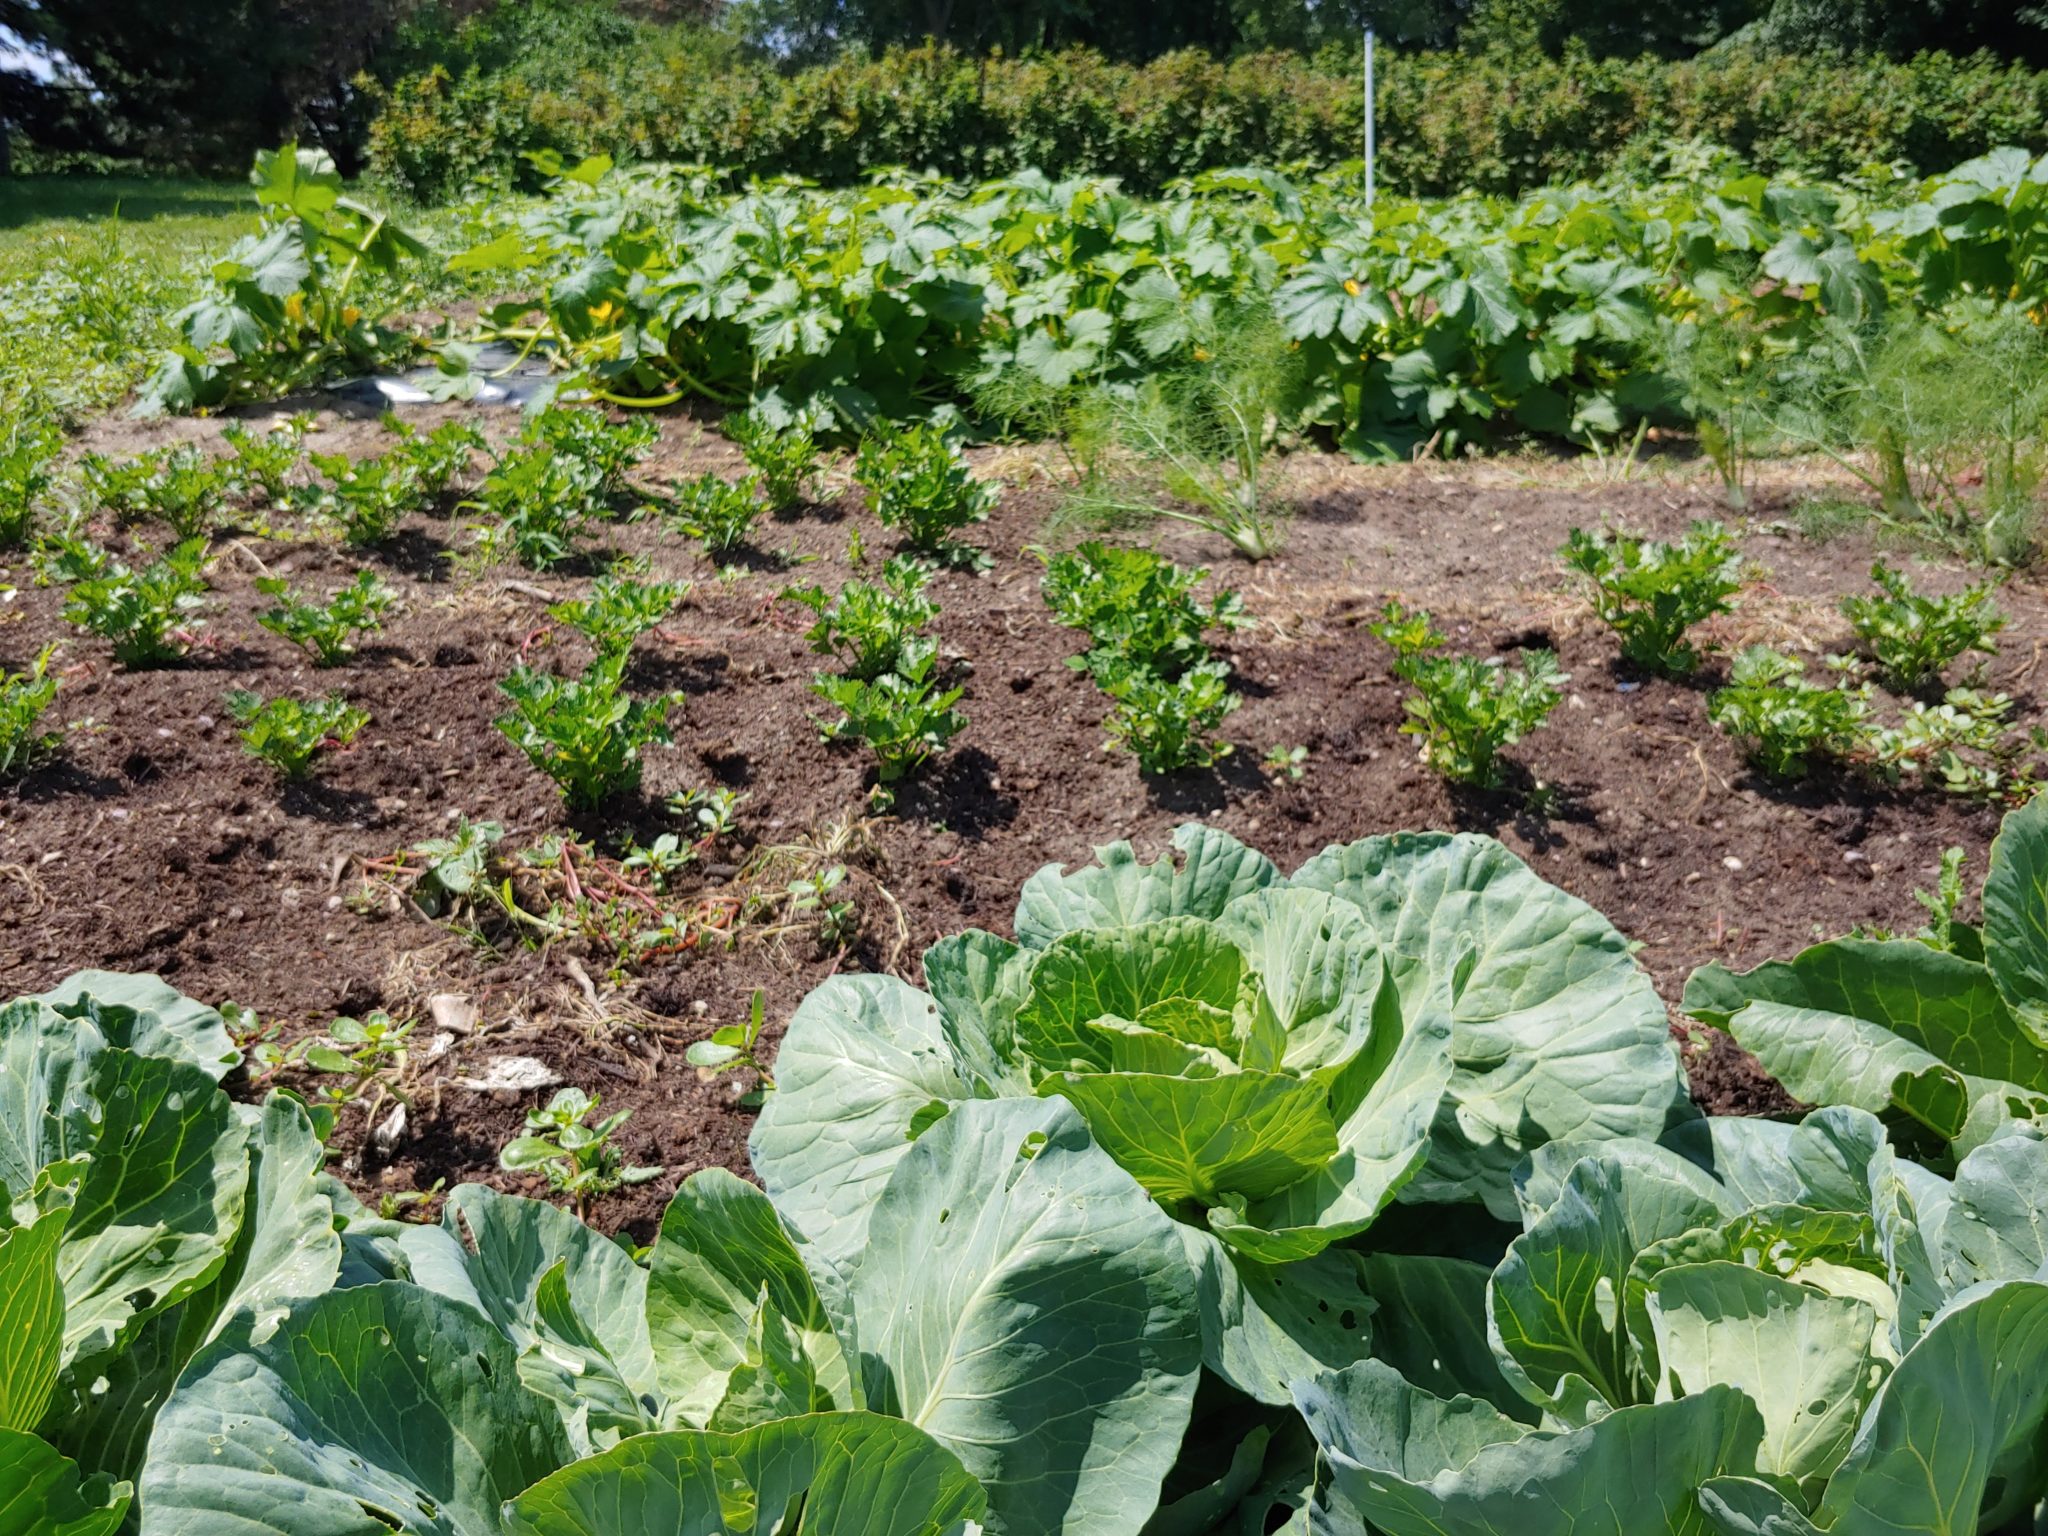 field with cabbage and other greens